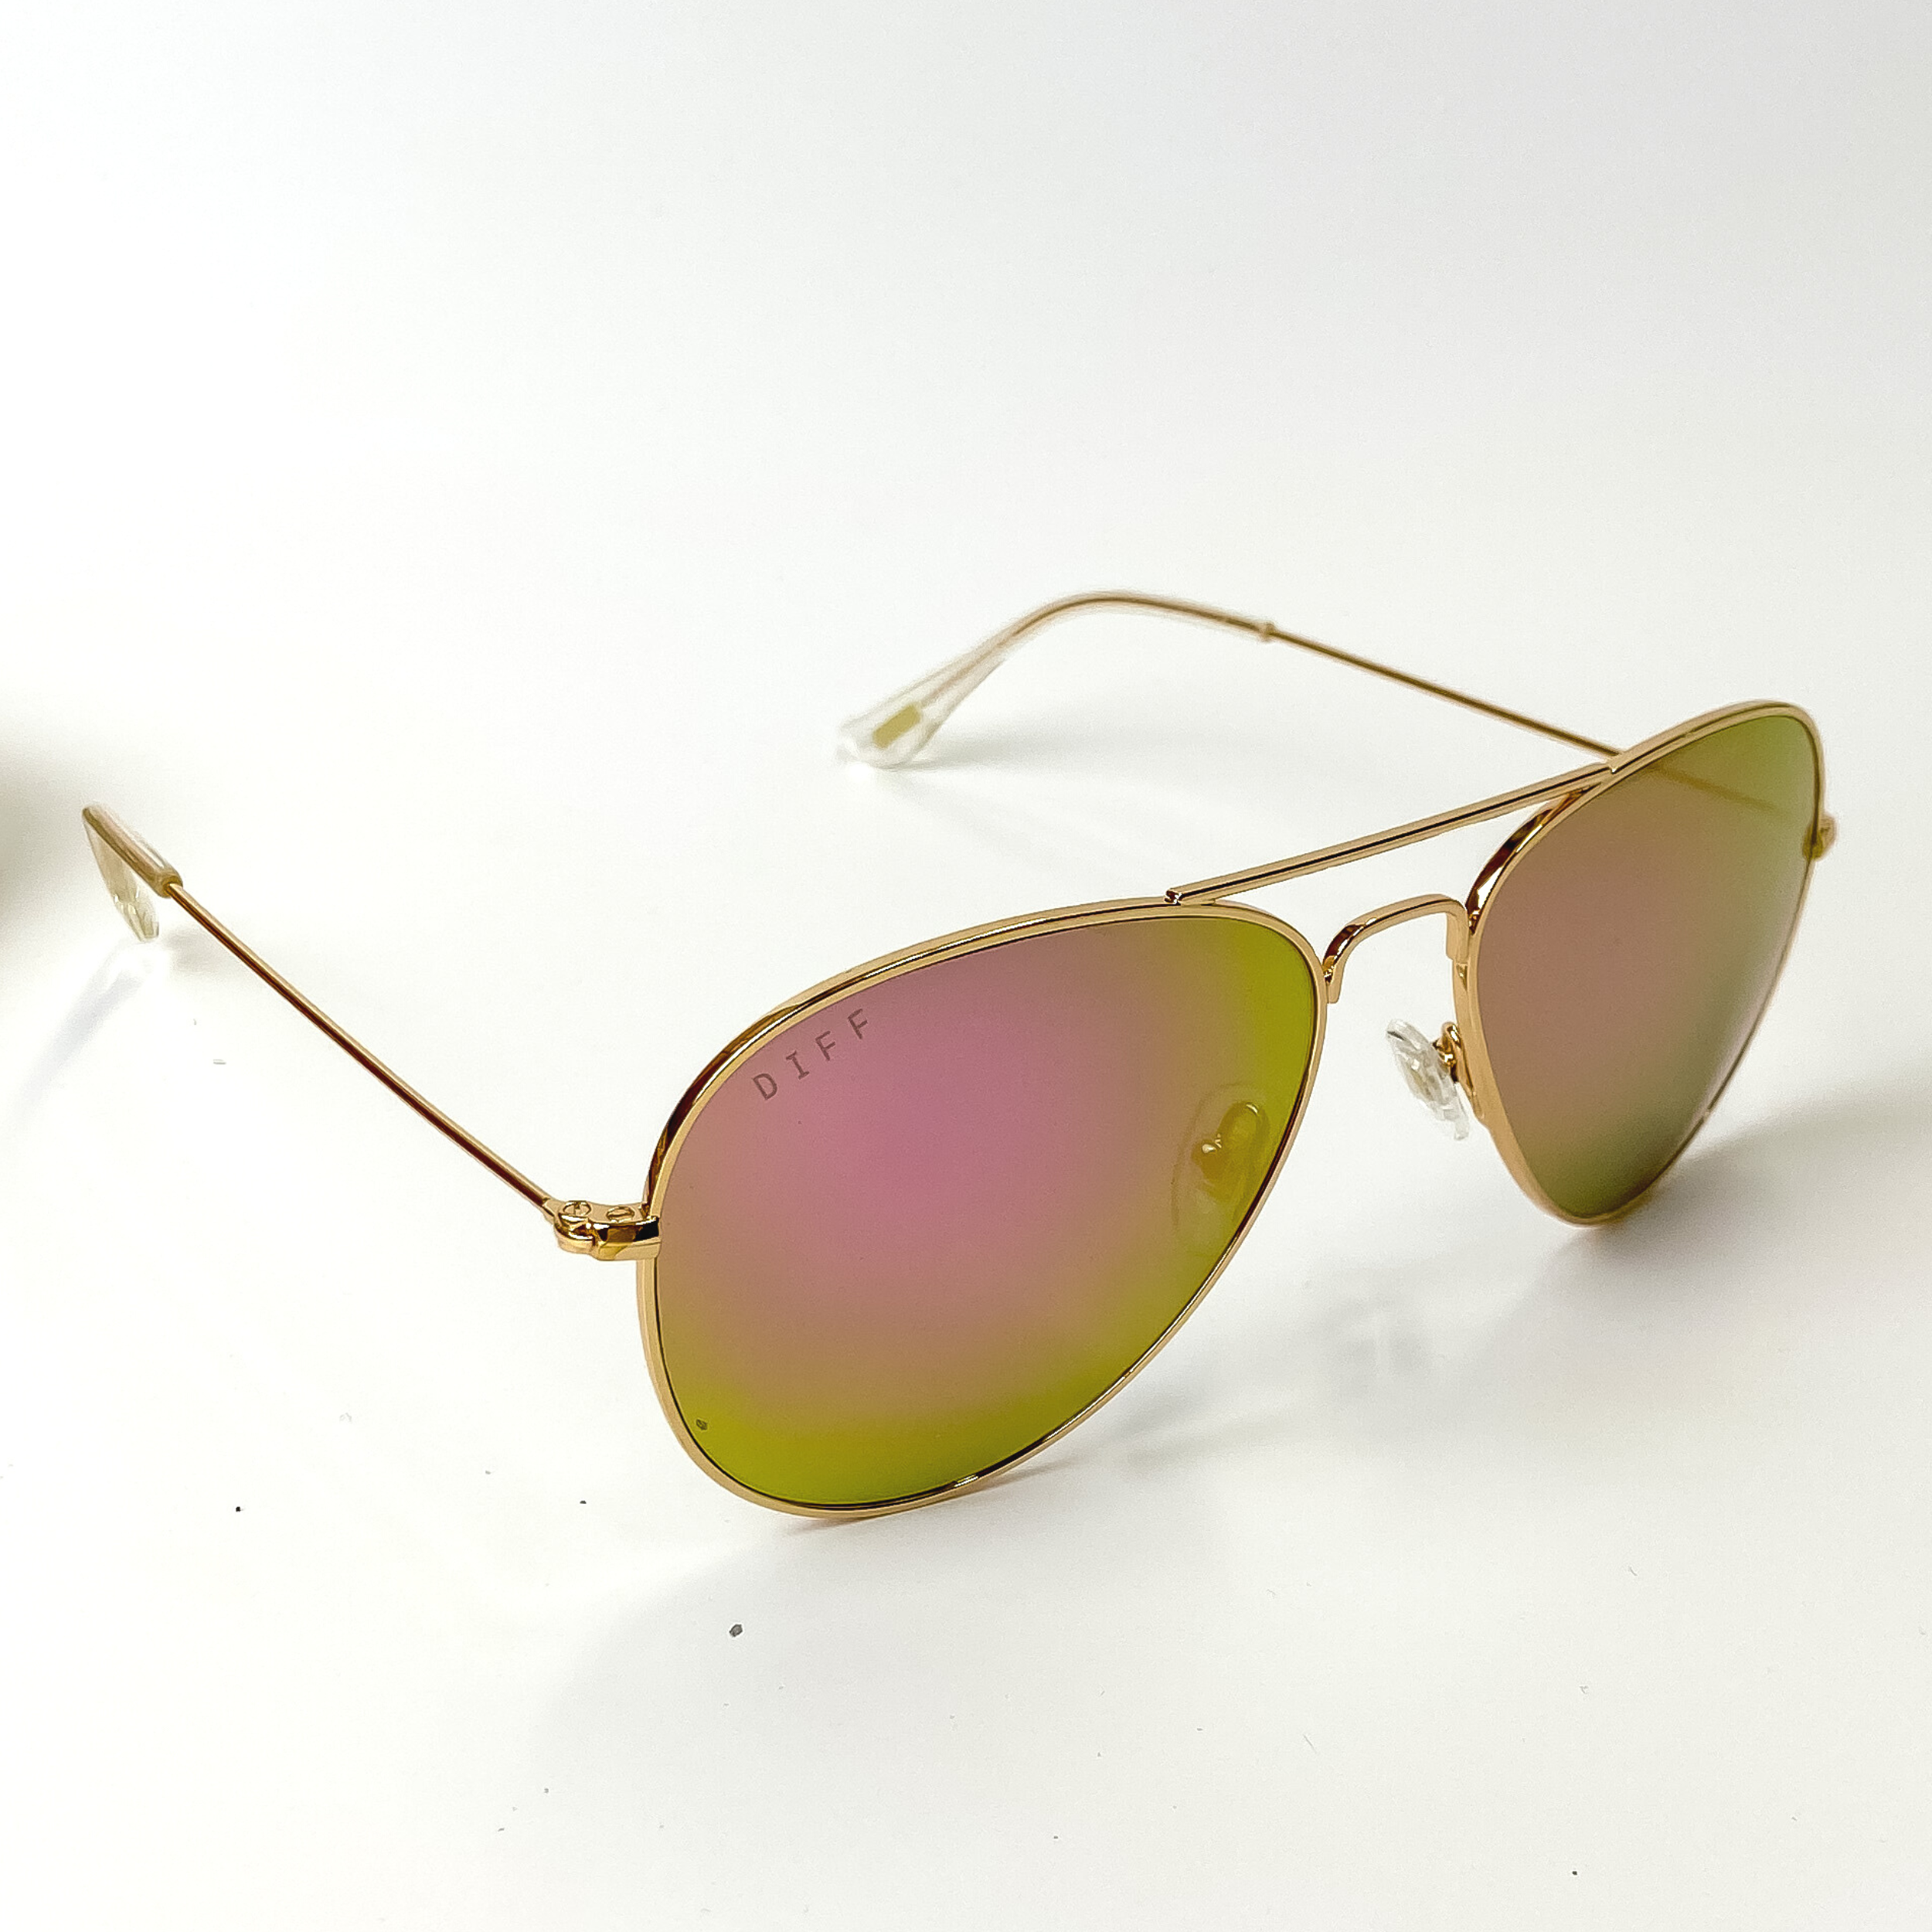 A pair of aviator style sunglasses with pink mirror lenses and gold tone frames. These sunglasses are pictured on a white background with gold jewelry.